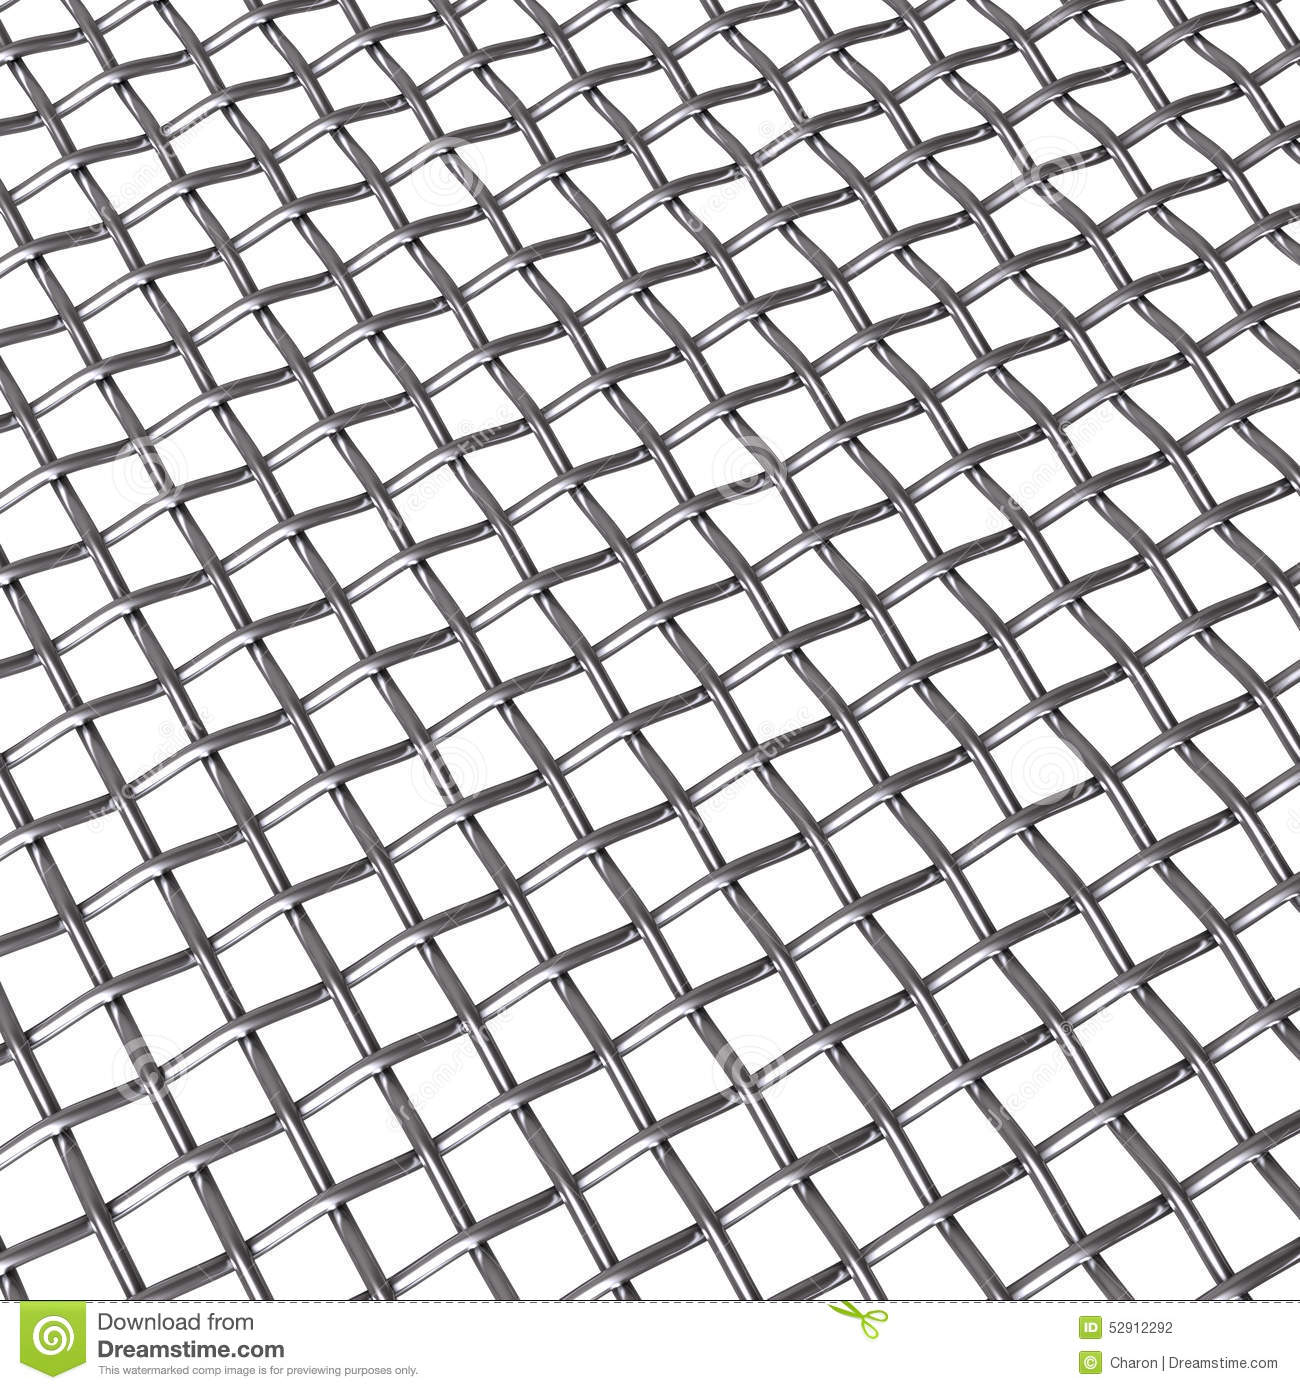 Steel wire mesh texture stock photo. Image of partition.